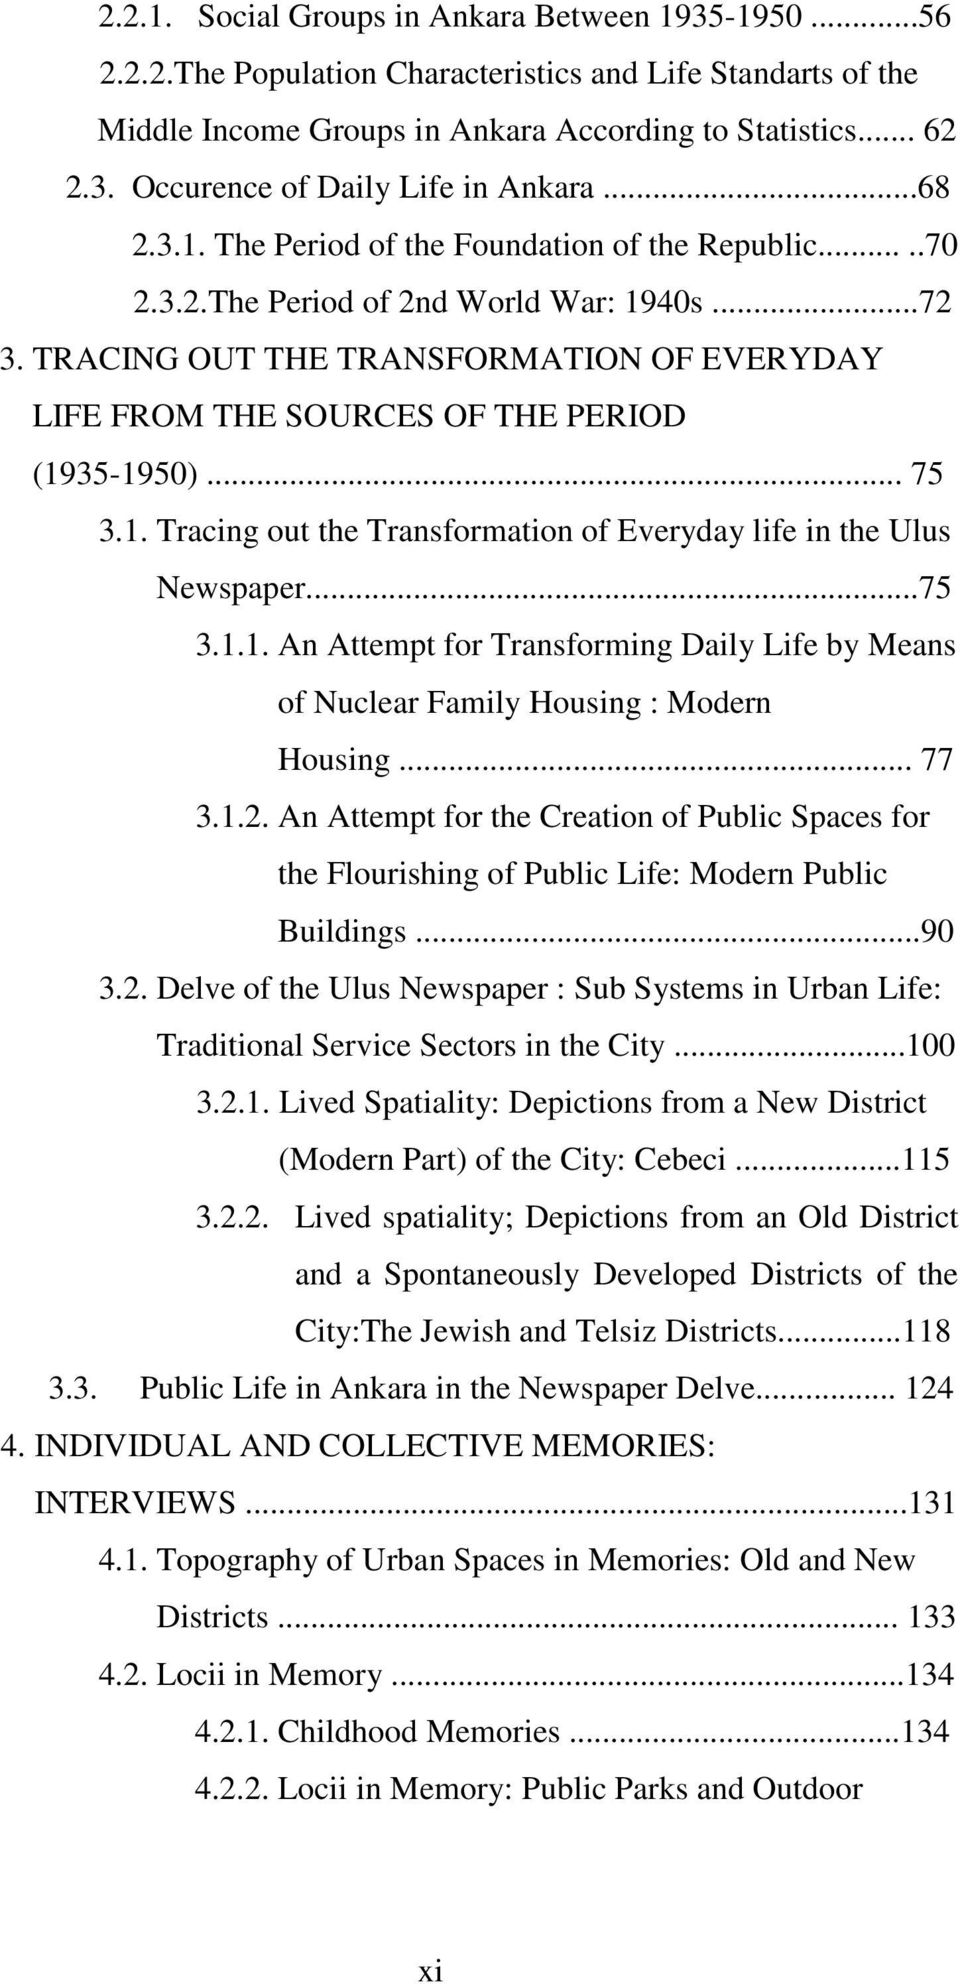 TRACING OUT THE TRANSFORMATION OF EVERYDAY LIFE FROM THE SOURCES OF THE PERIOD (1935-1950)... 75 3.1. Tracing out the Transformation of Everyday life in the Ulus Newspaper...75 3.1.1. An Attempt for Transforming Daily Life by Means of Nuclear Family Housing : Modern Housing.